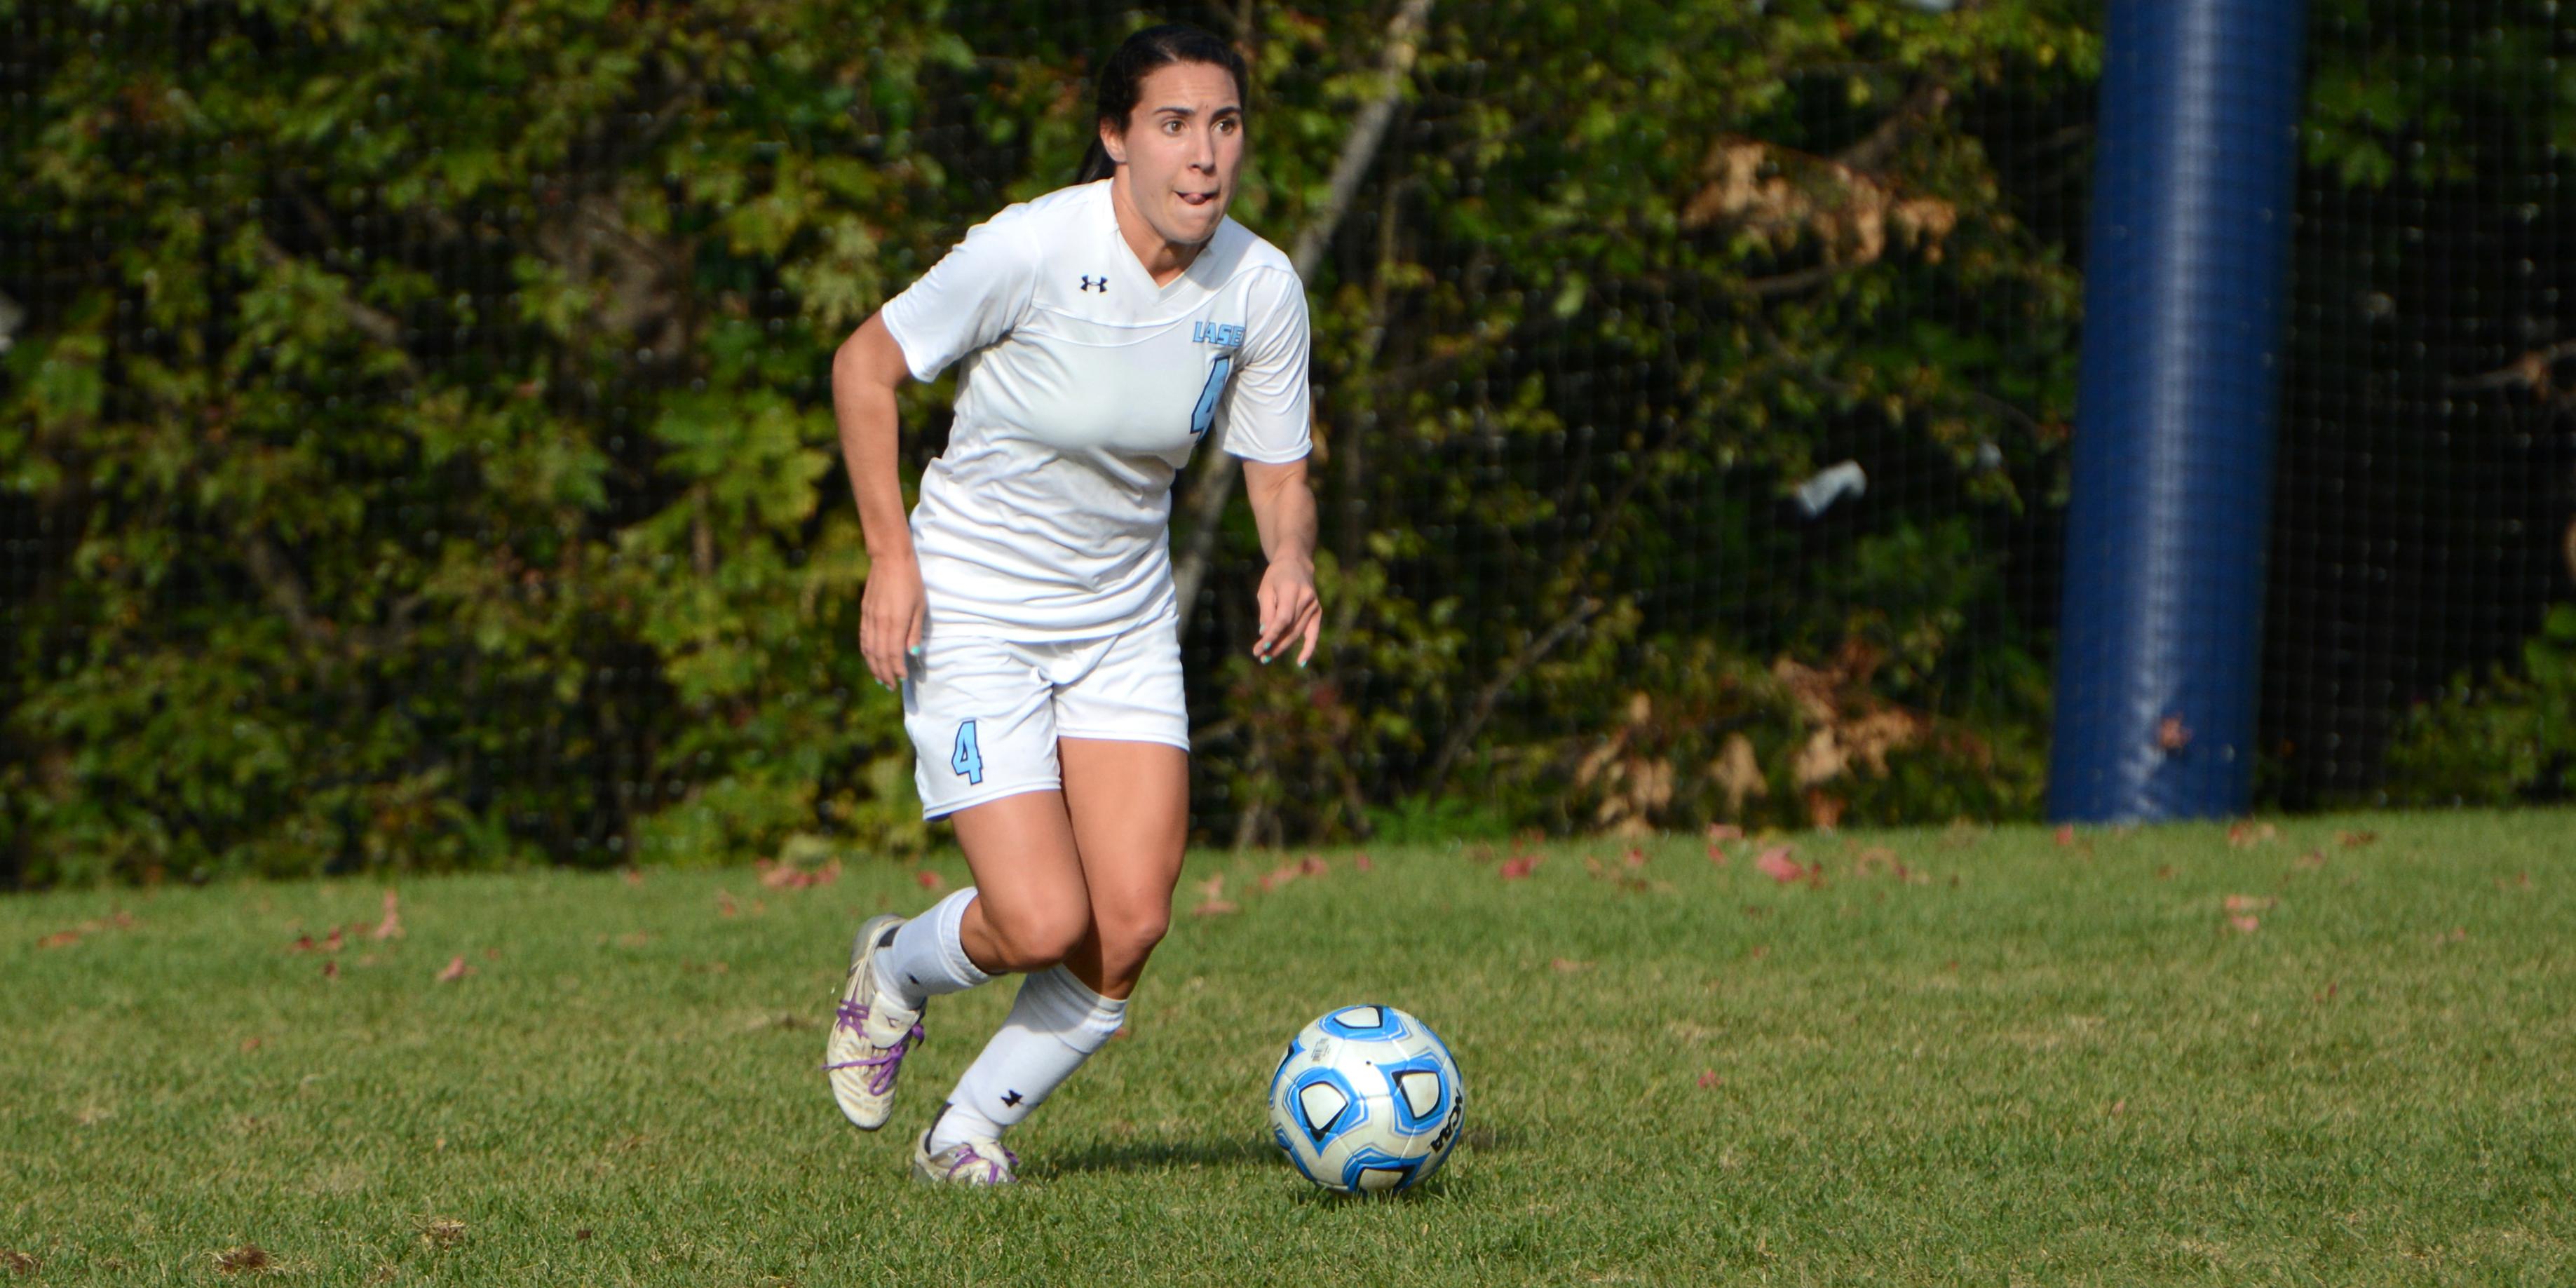 Women's Soccer Stays Unbeaten in GNAC with 2-1 Win at Simmons